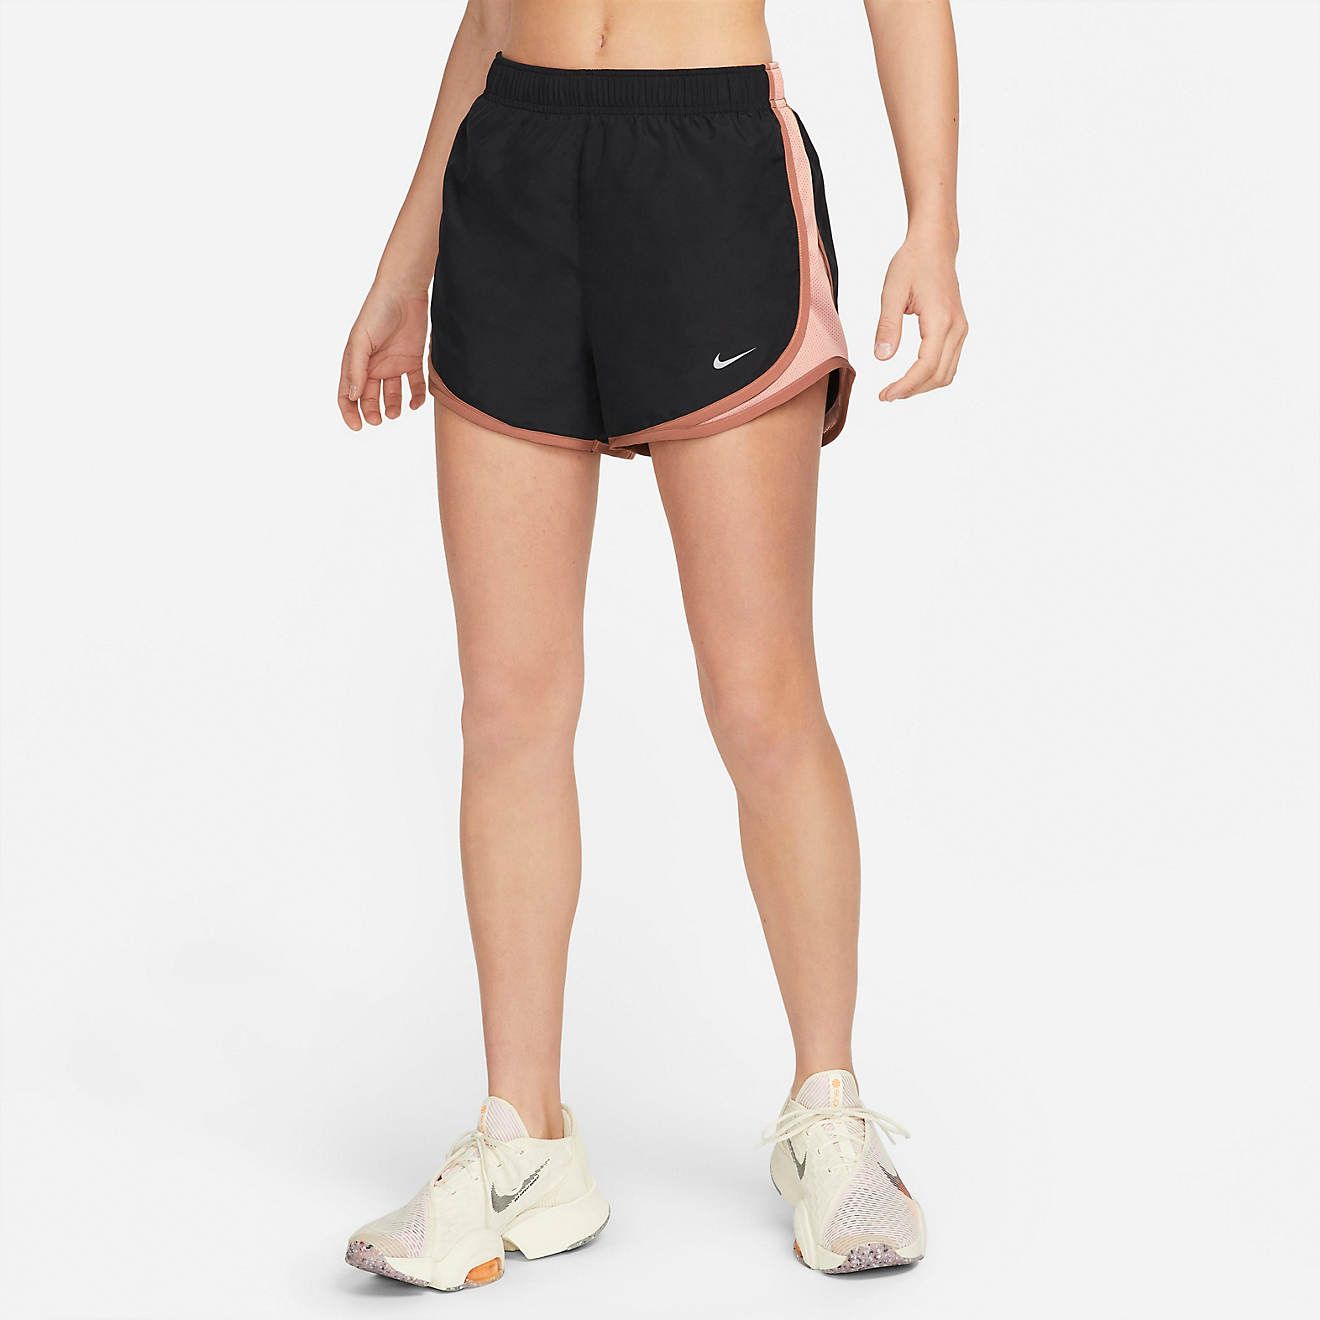 Nike Women's Tempo Dri-FIT Running Shorts | Academy | Academy Sports + Outdoors